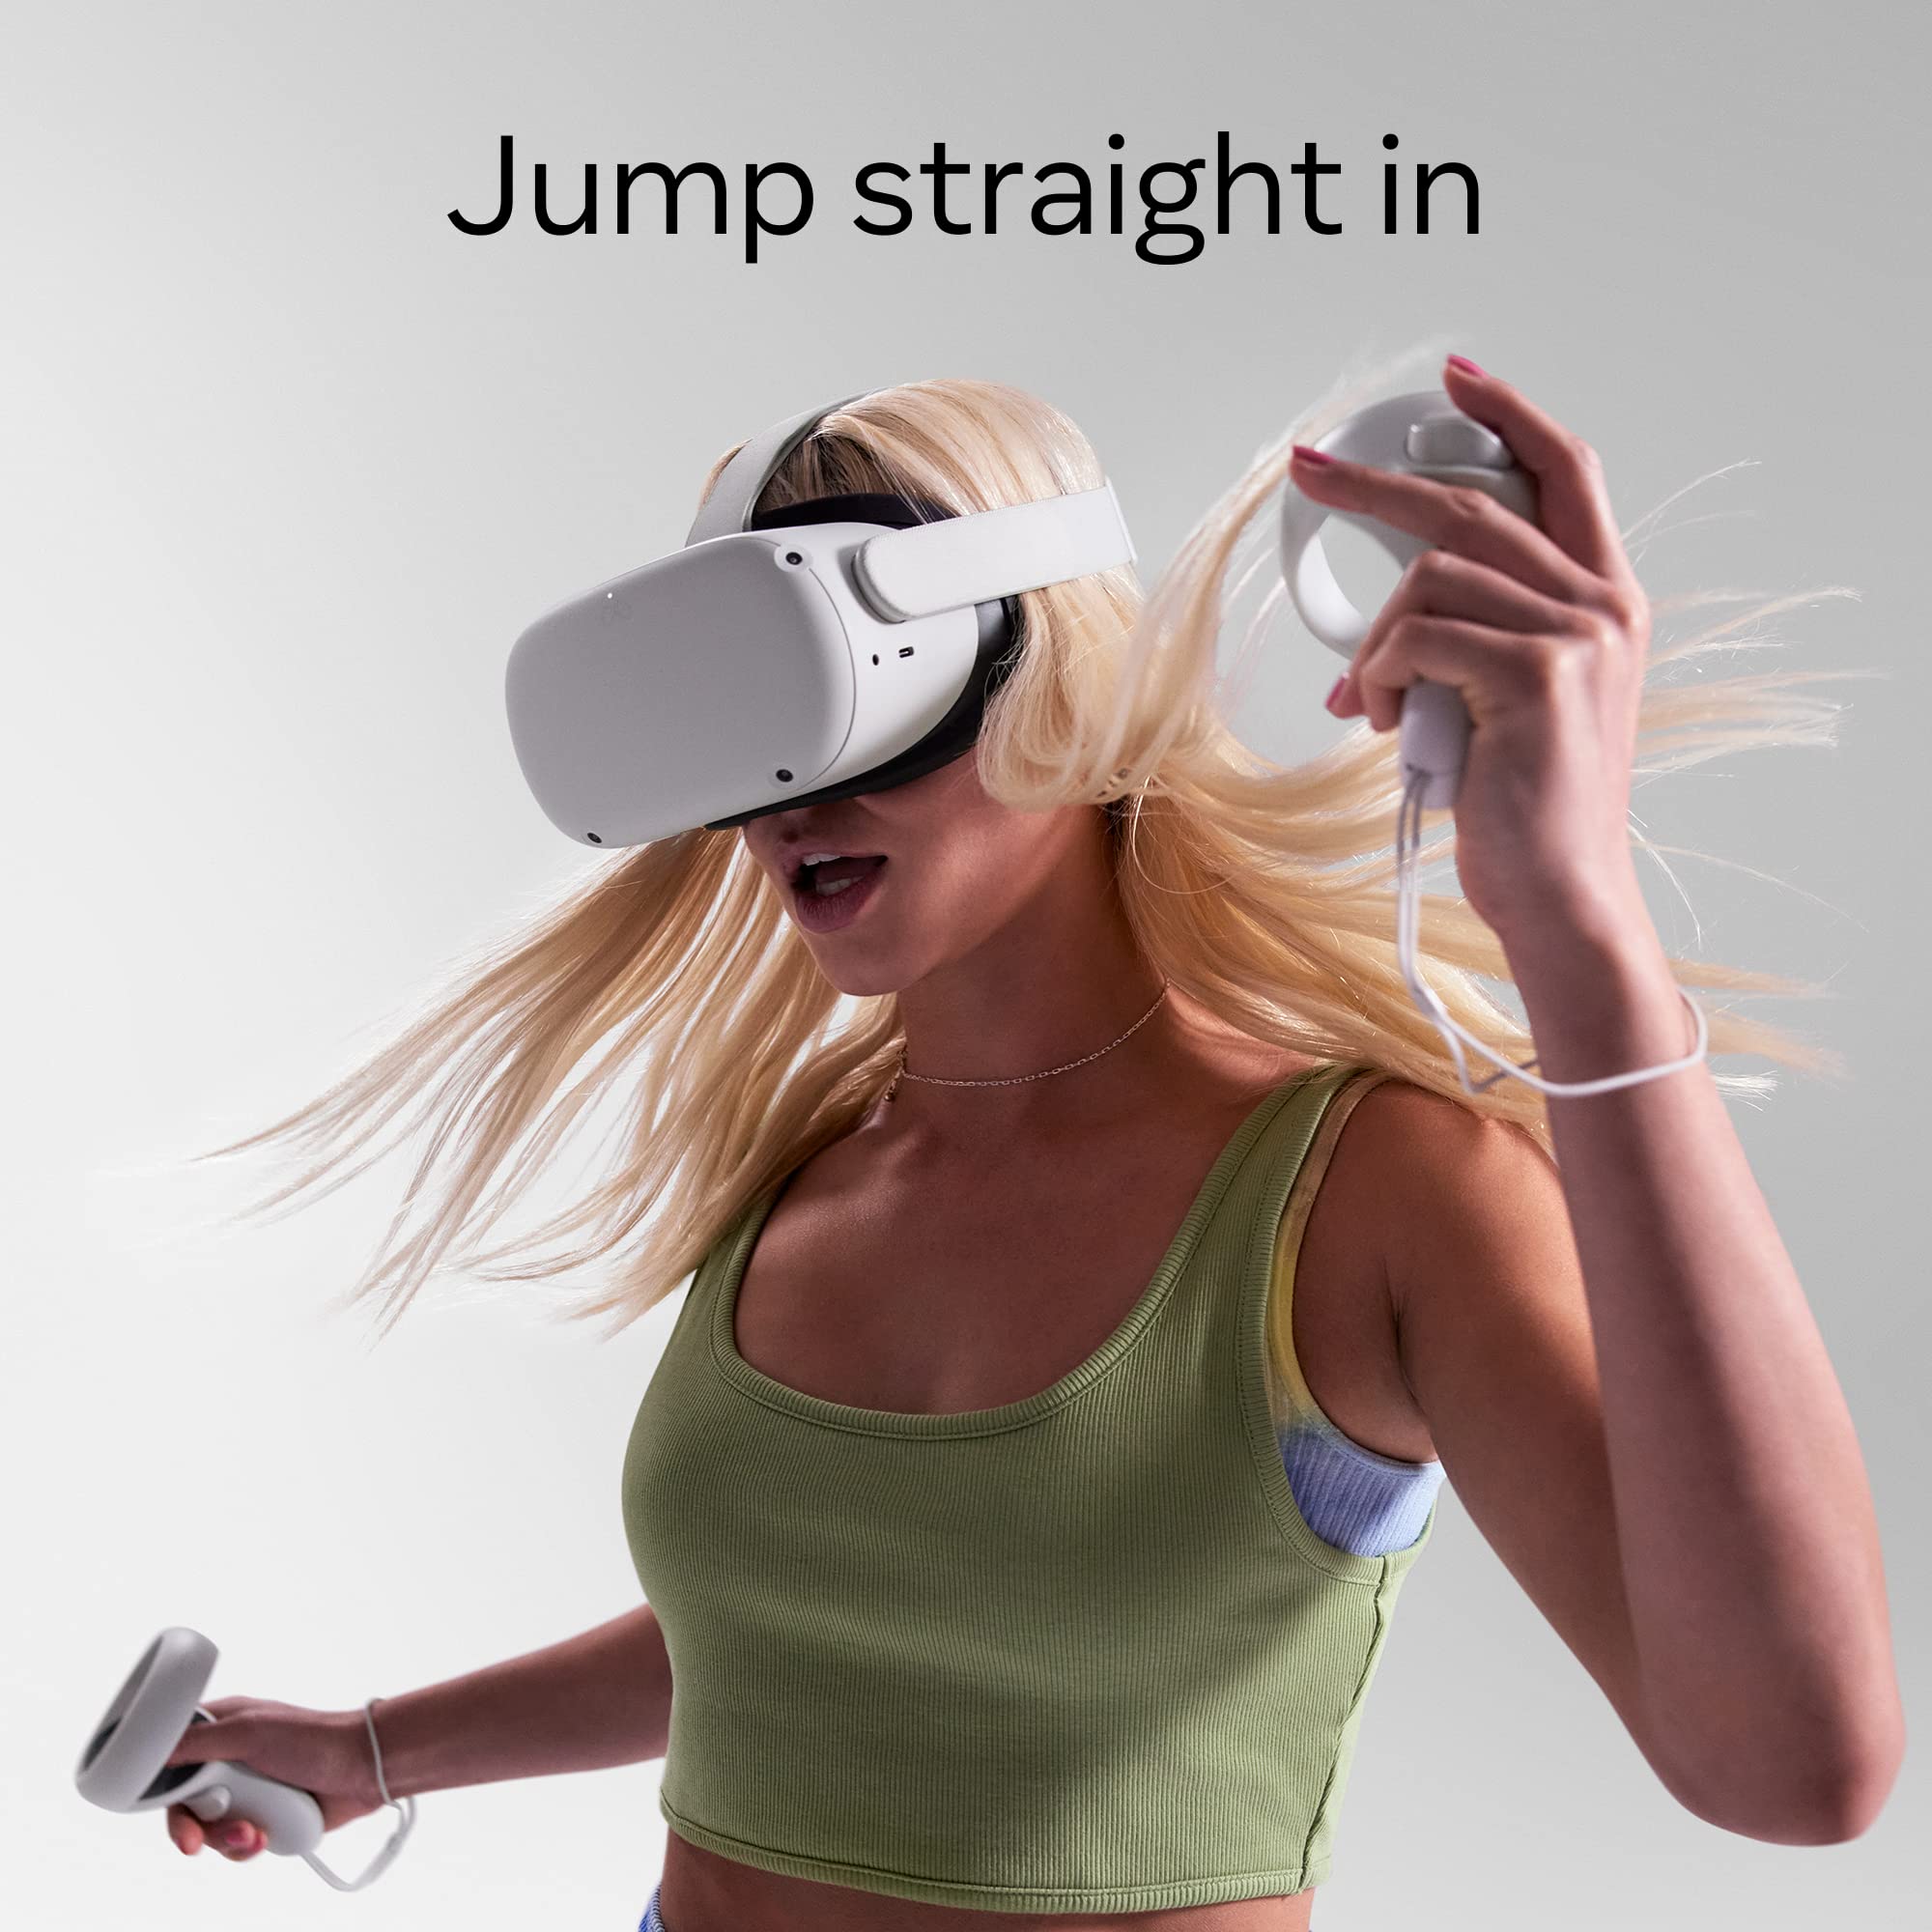 Meta Quest 2 — Advanced All-In-One Virtual Reality Headset — 128 GB $249